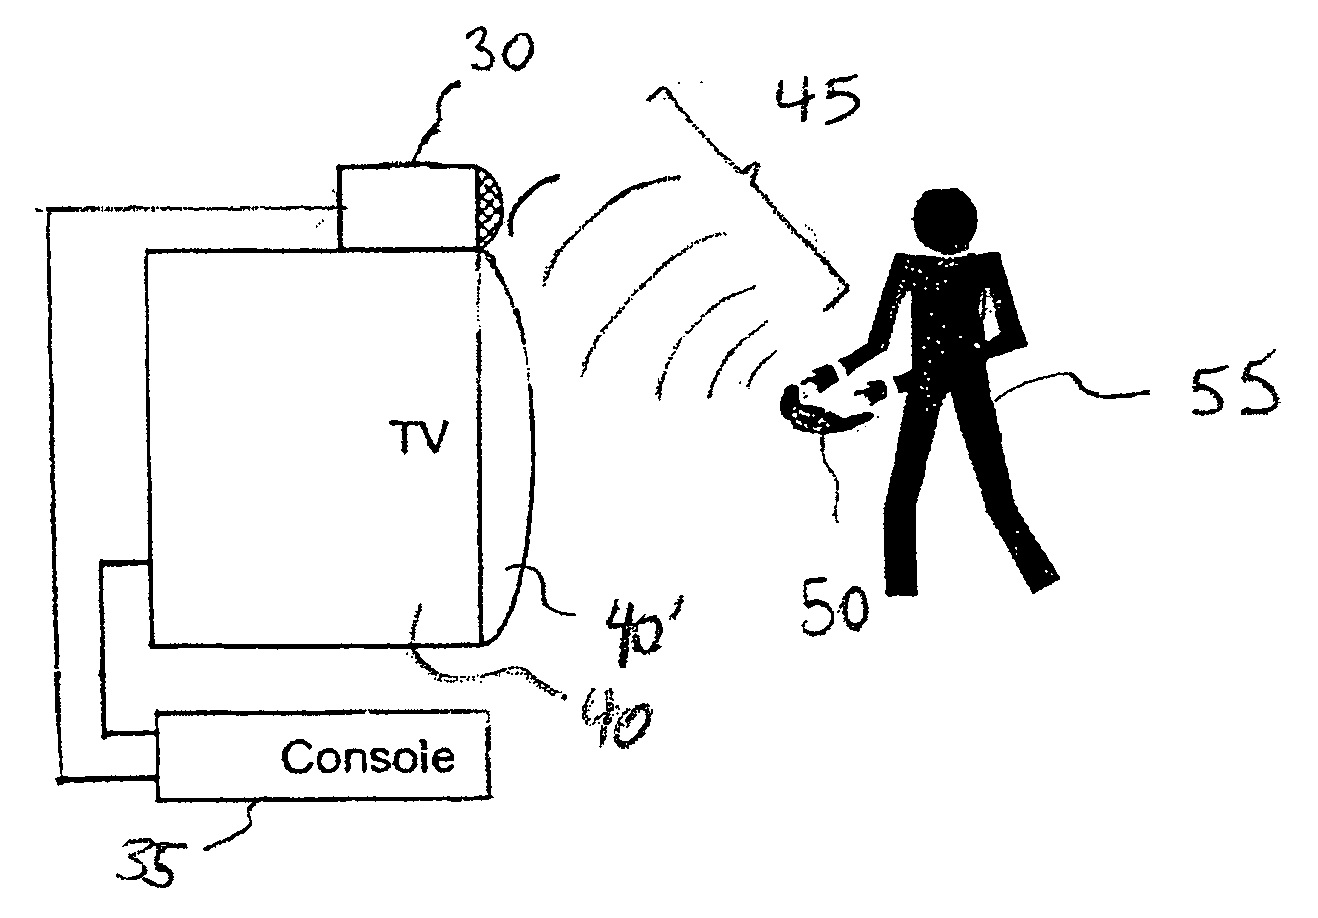 System and method for control by audible device